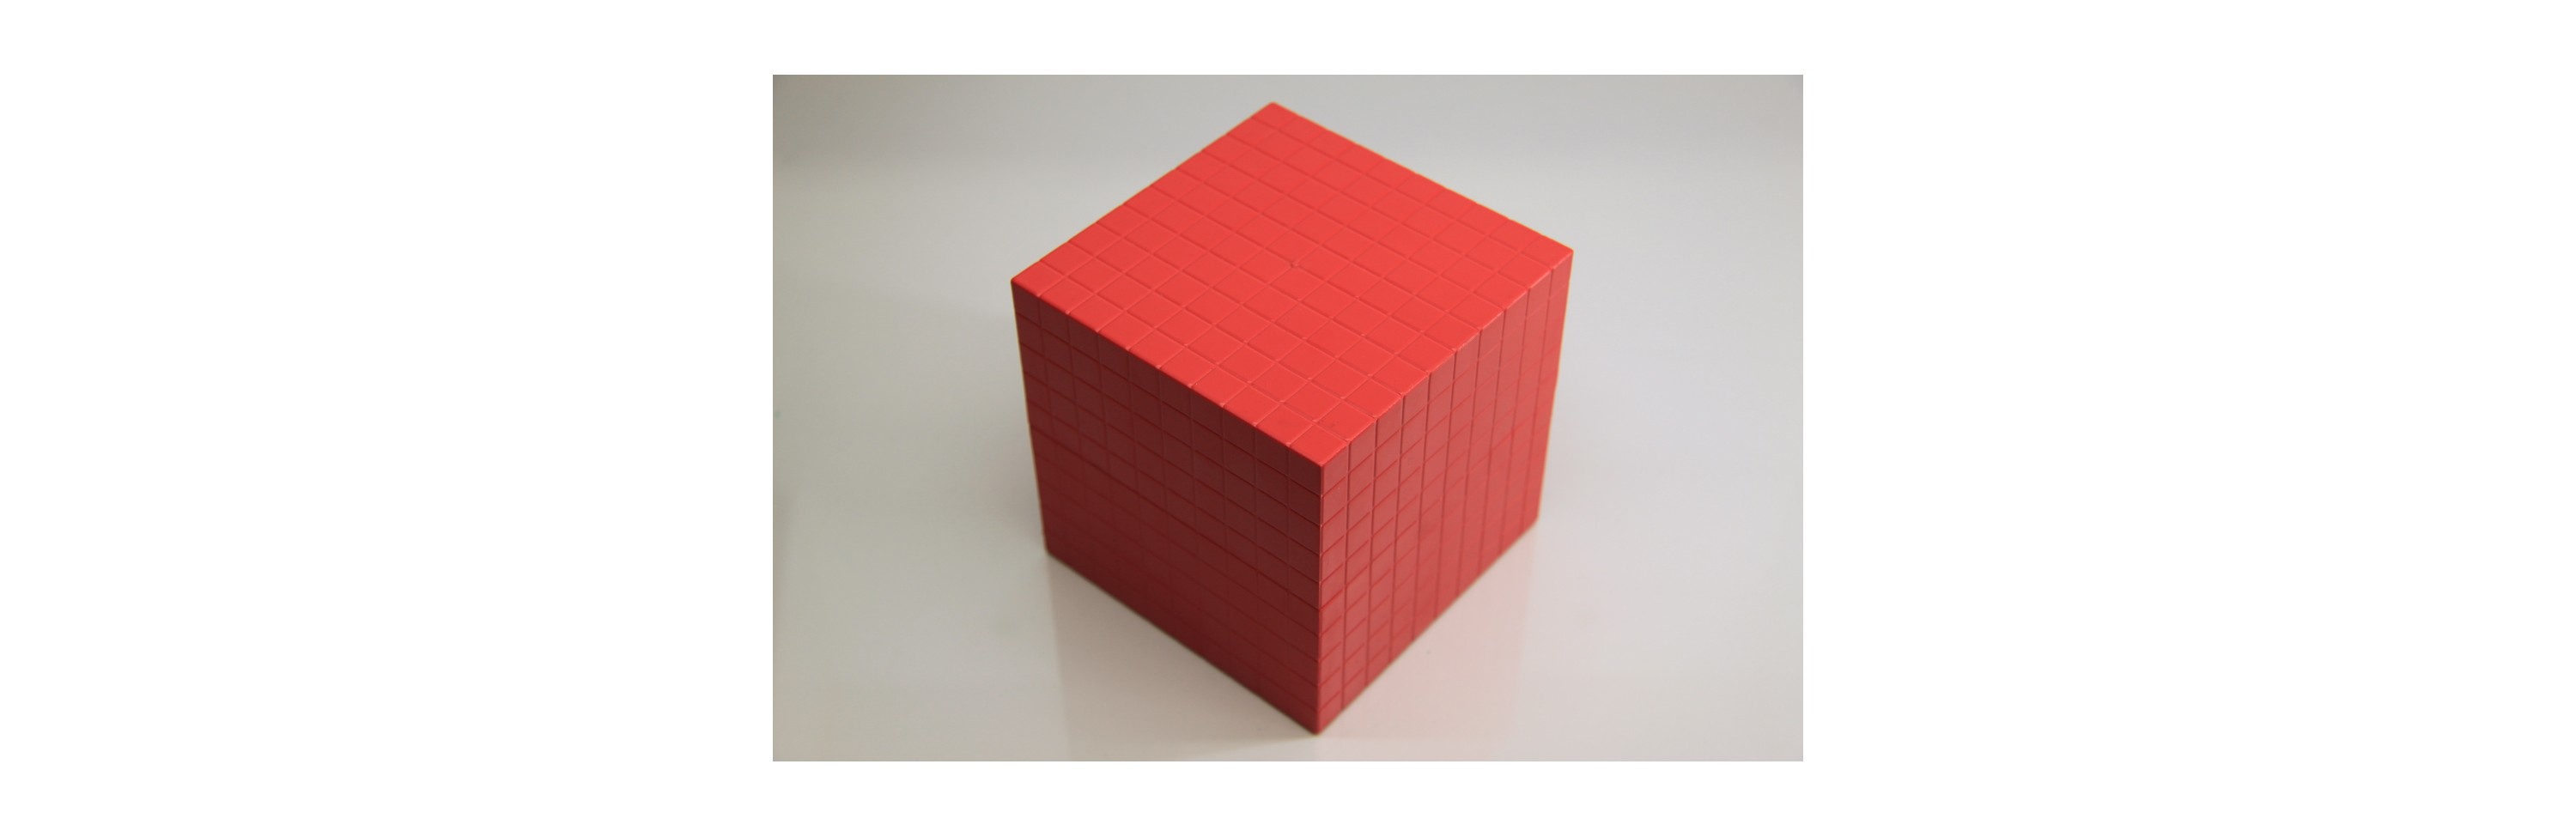 Wissner® active learning - Thousand Cube 1 pcs (red) RE-Plastic®